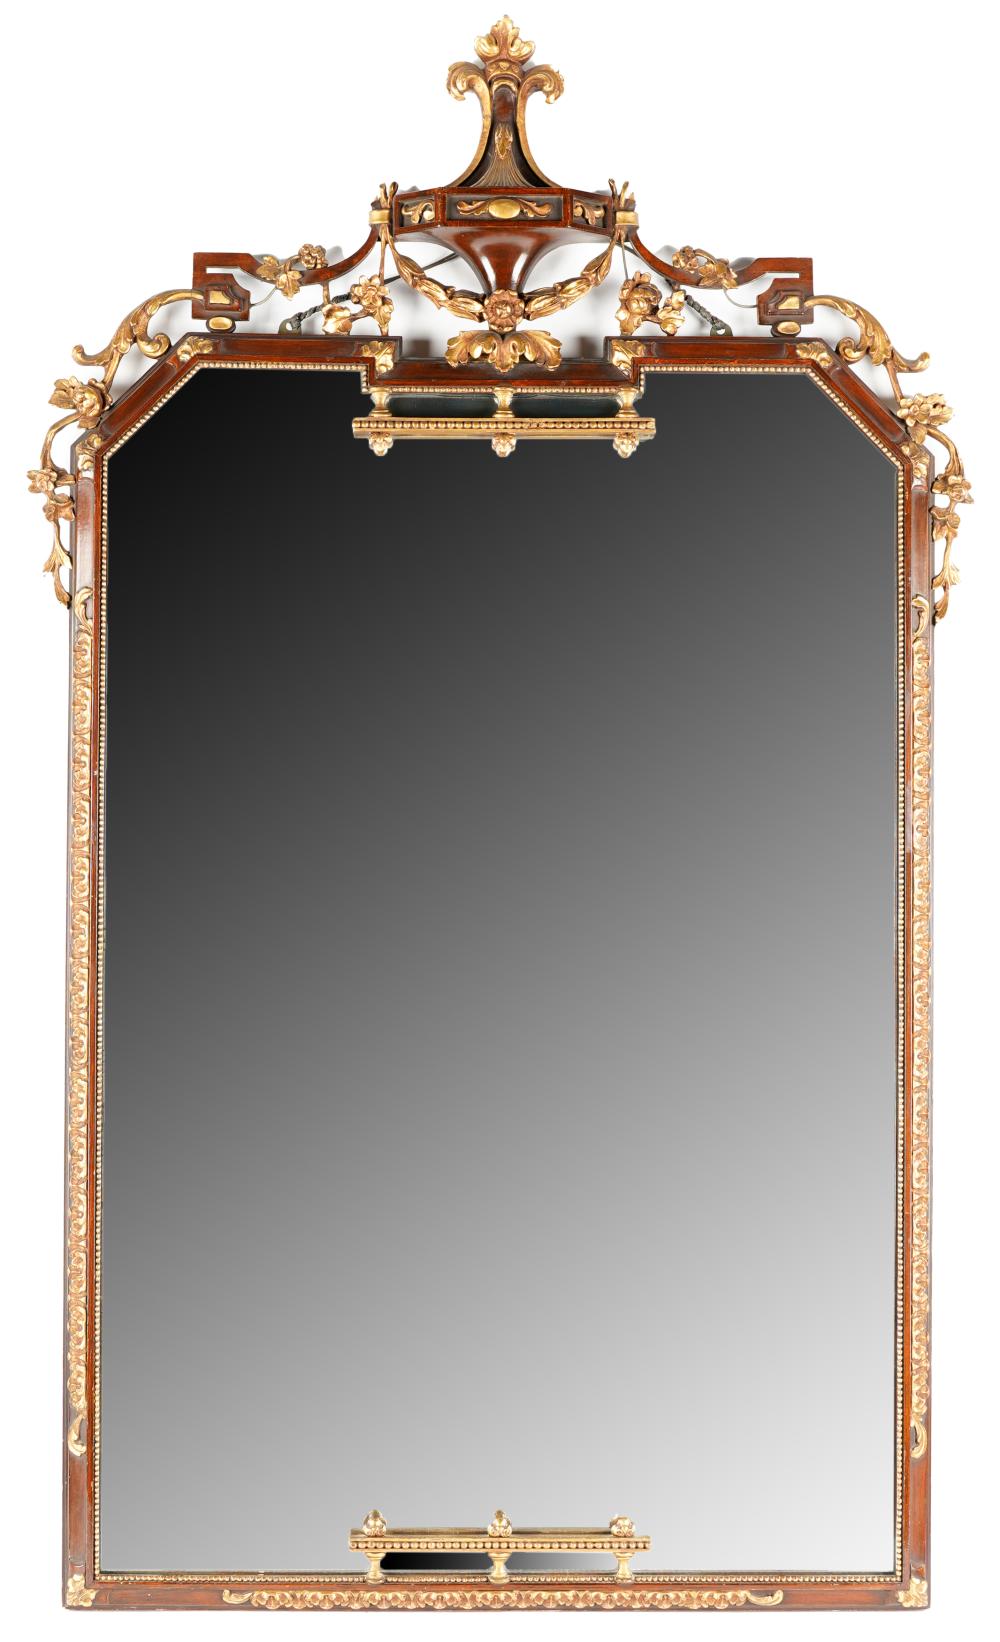 NEOCLASSICAL STYLE WALL MIRROR20th 324d2d